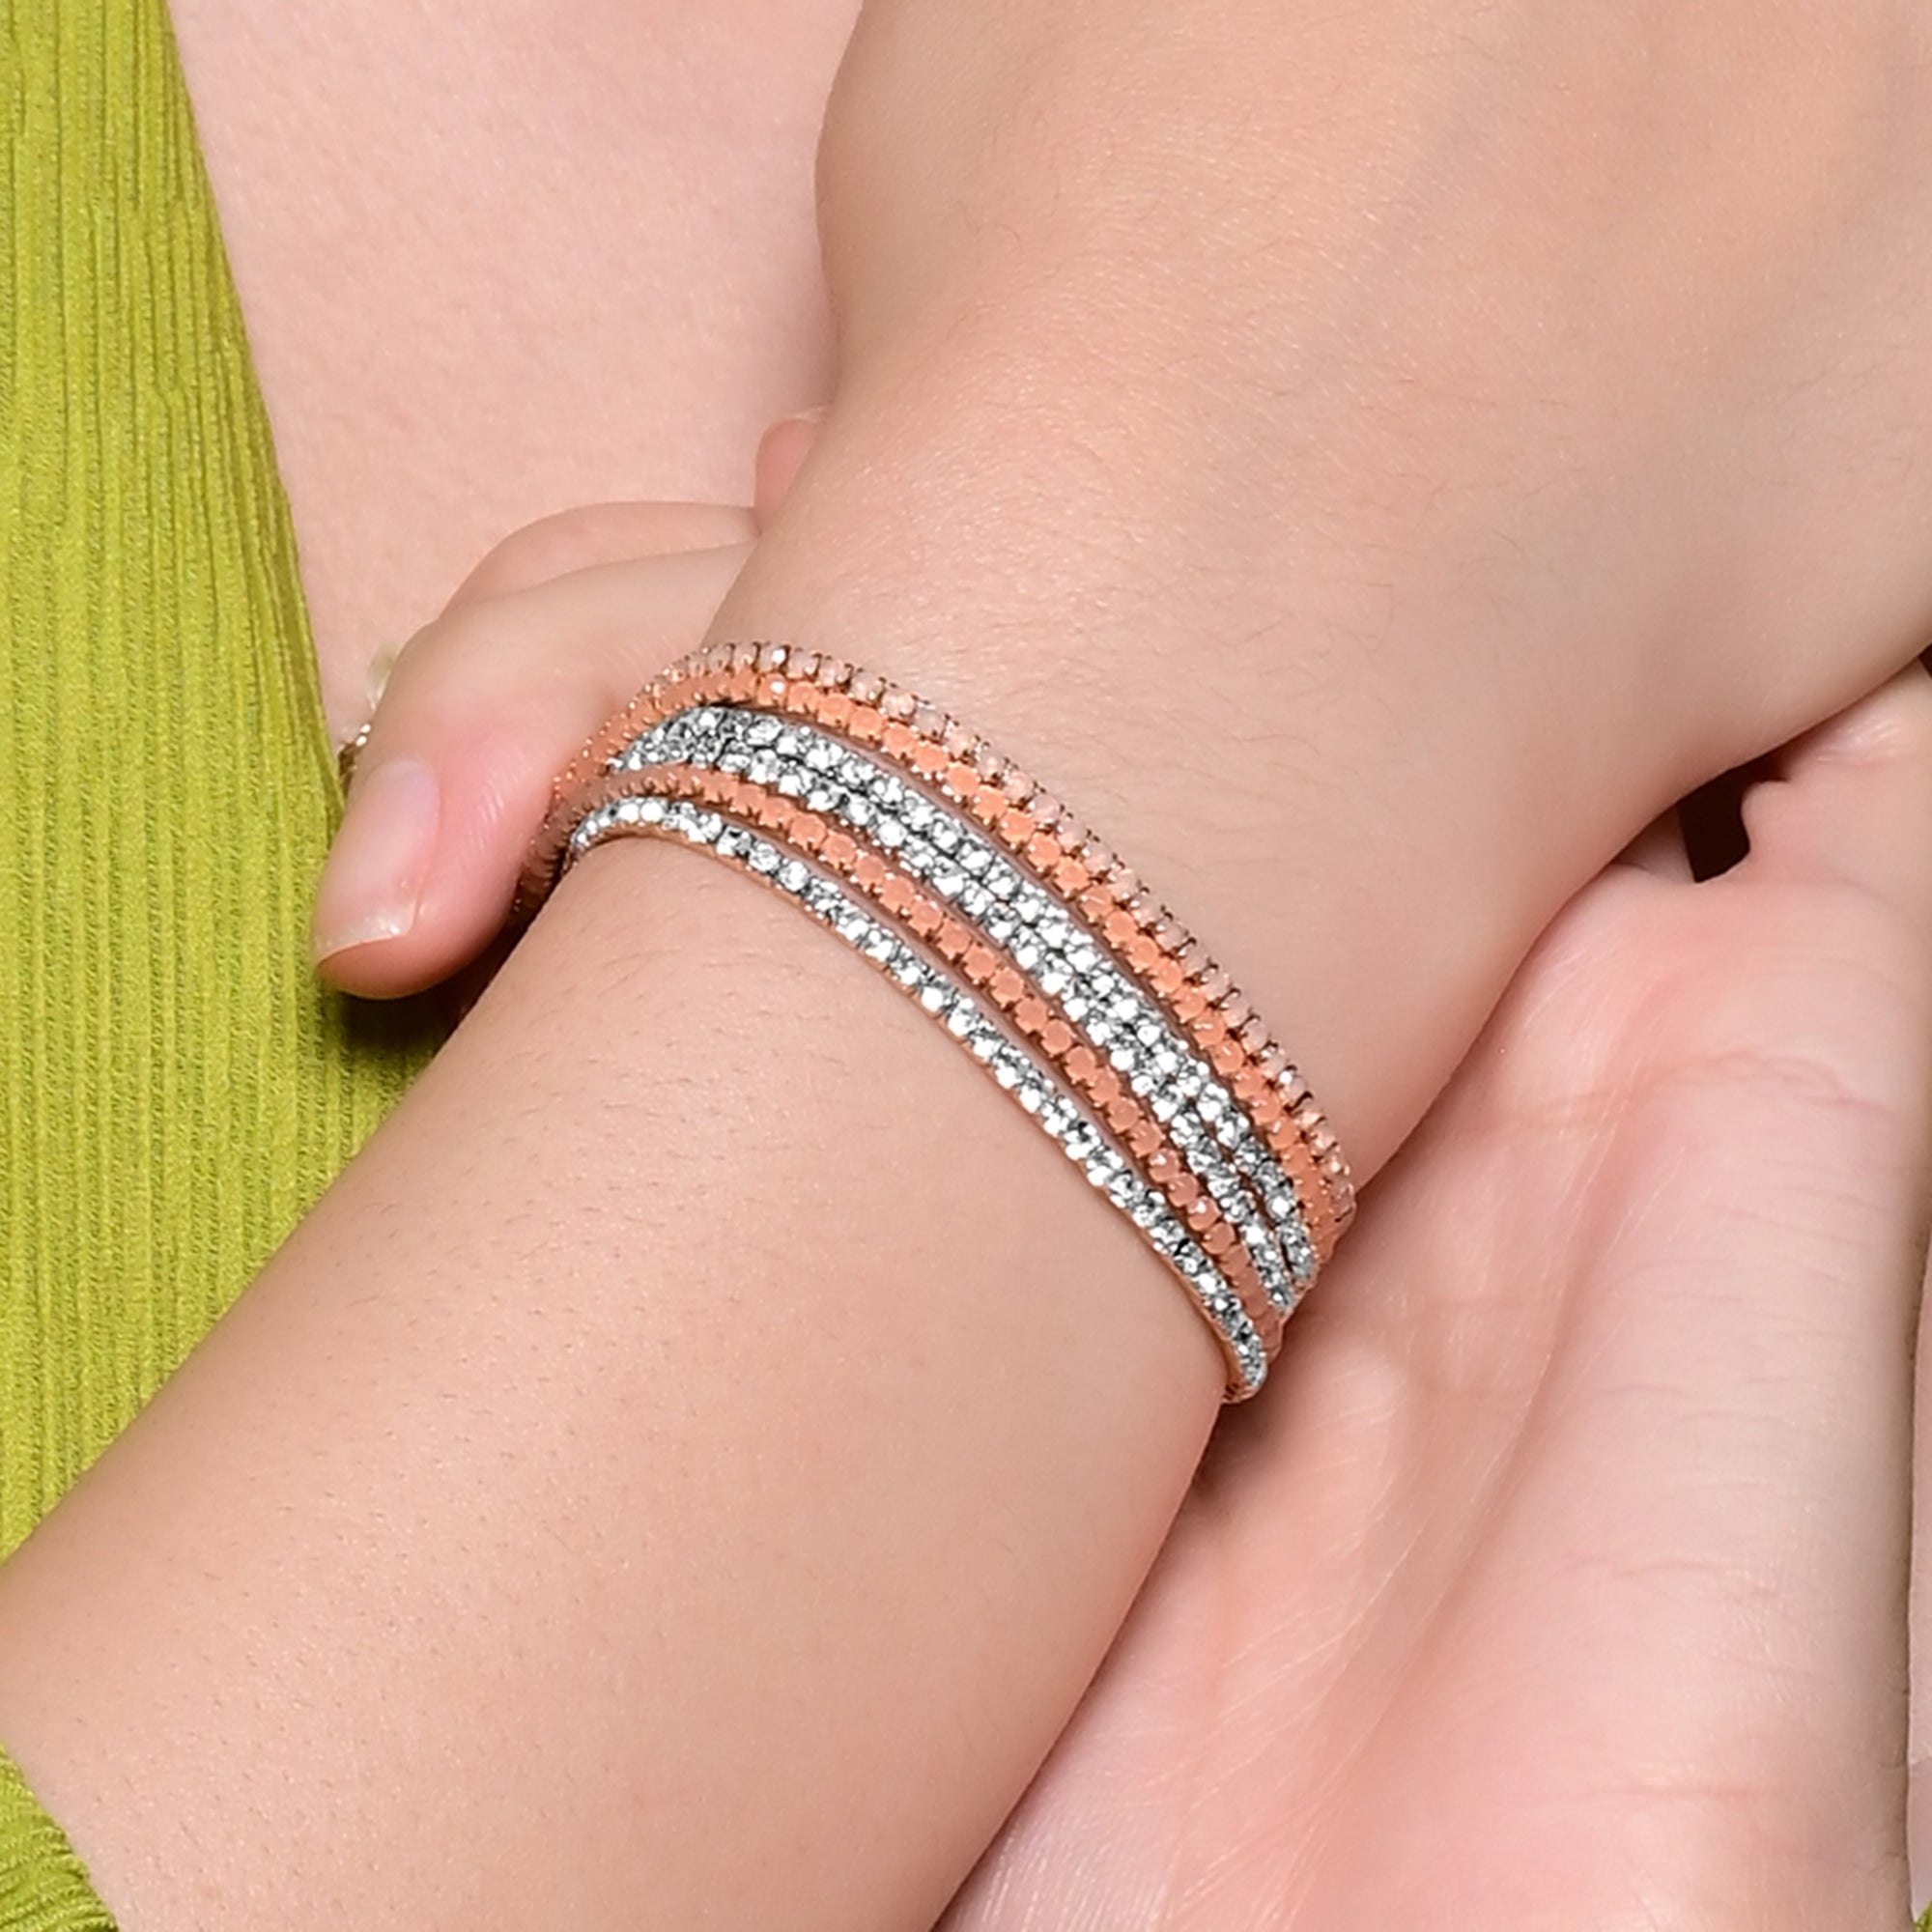 Accessorize Bracelet  Get Best Price from Manufacturers  Suppliers in  India